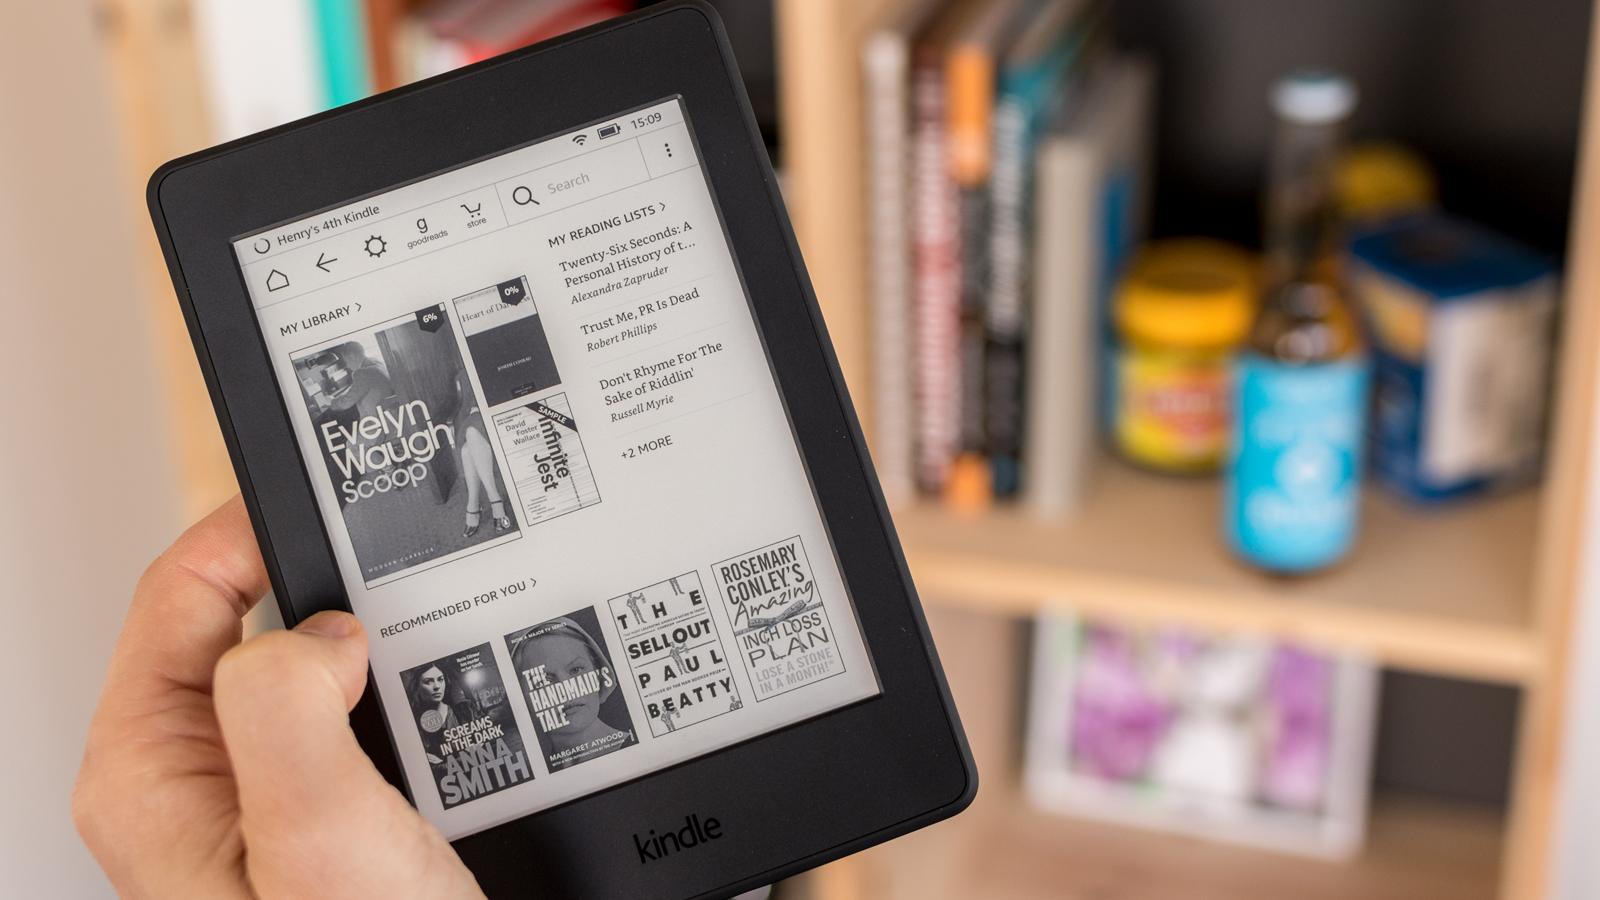 Kindle held in hand